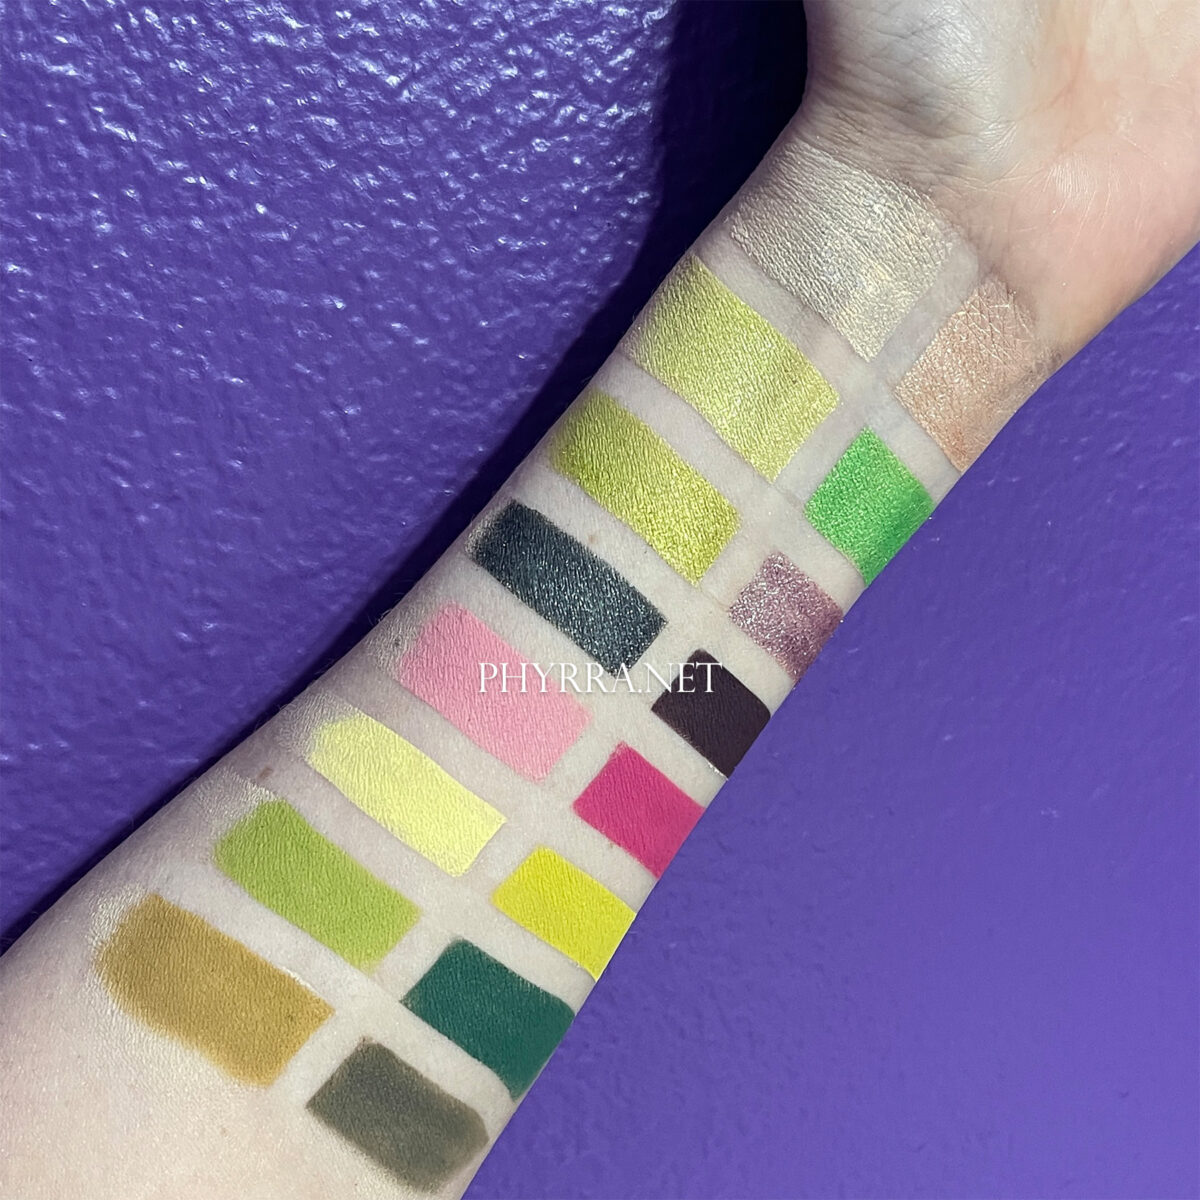 Angelica Nyqvist Hela Palette swatches